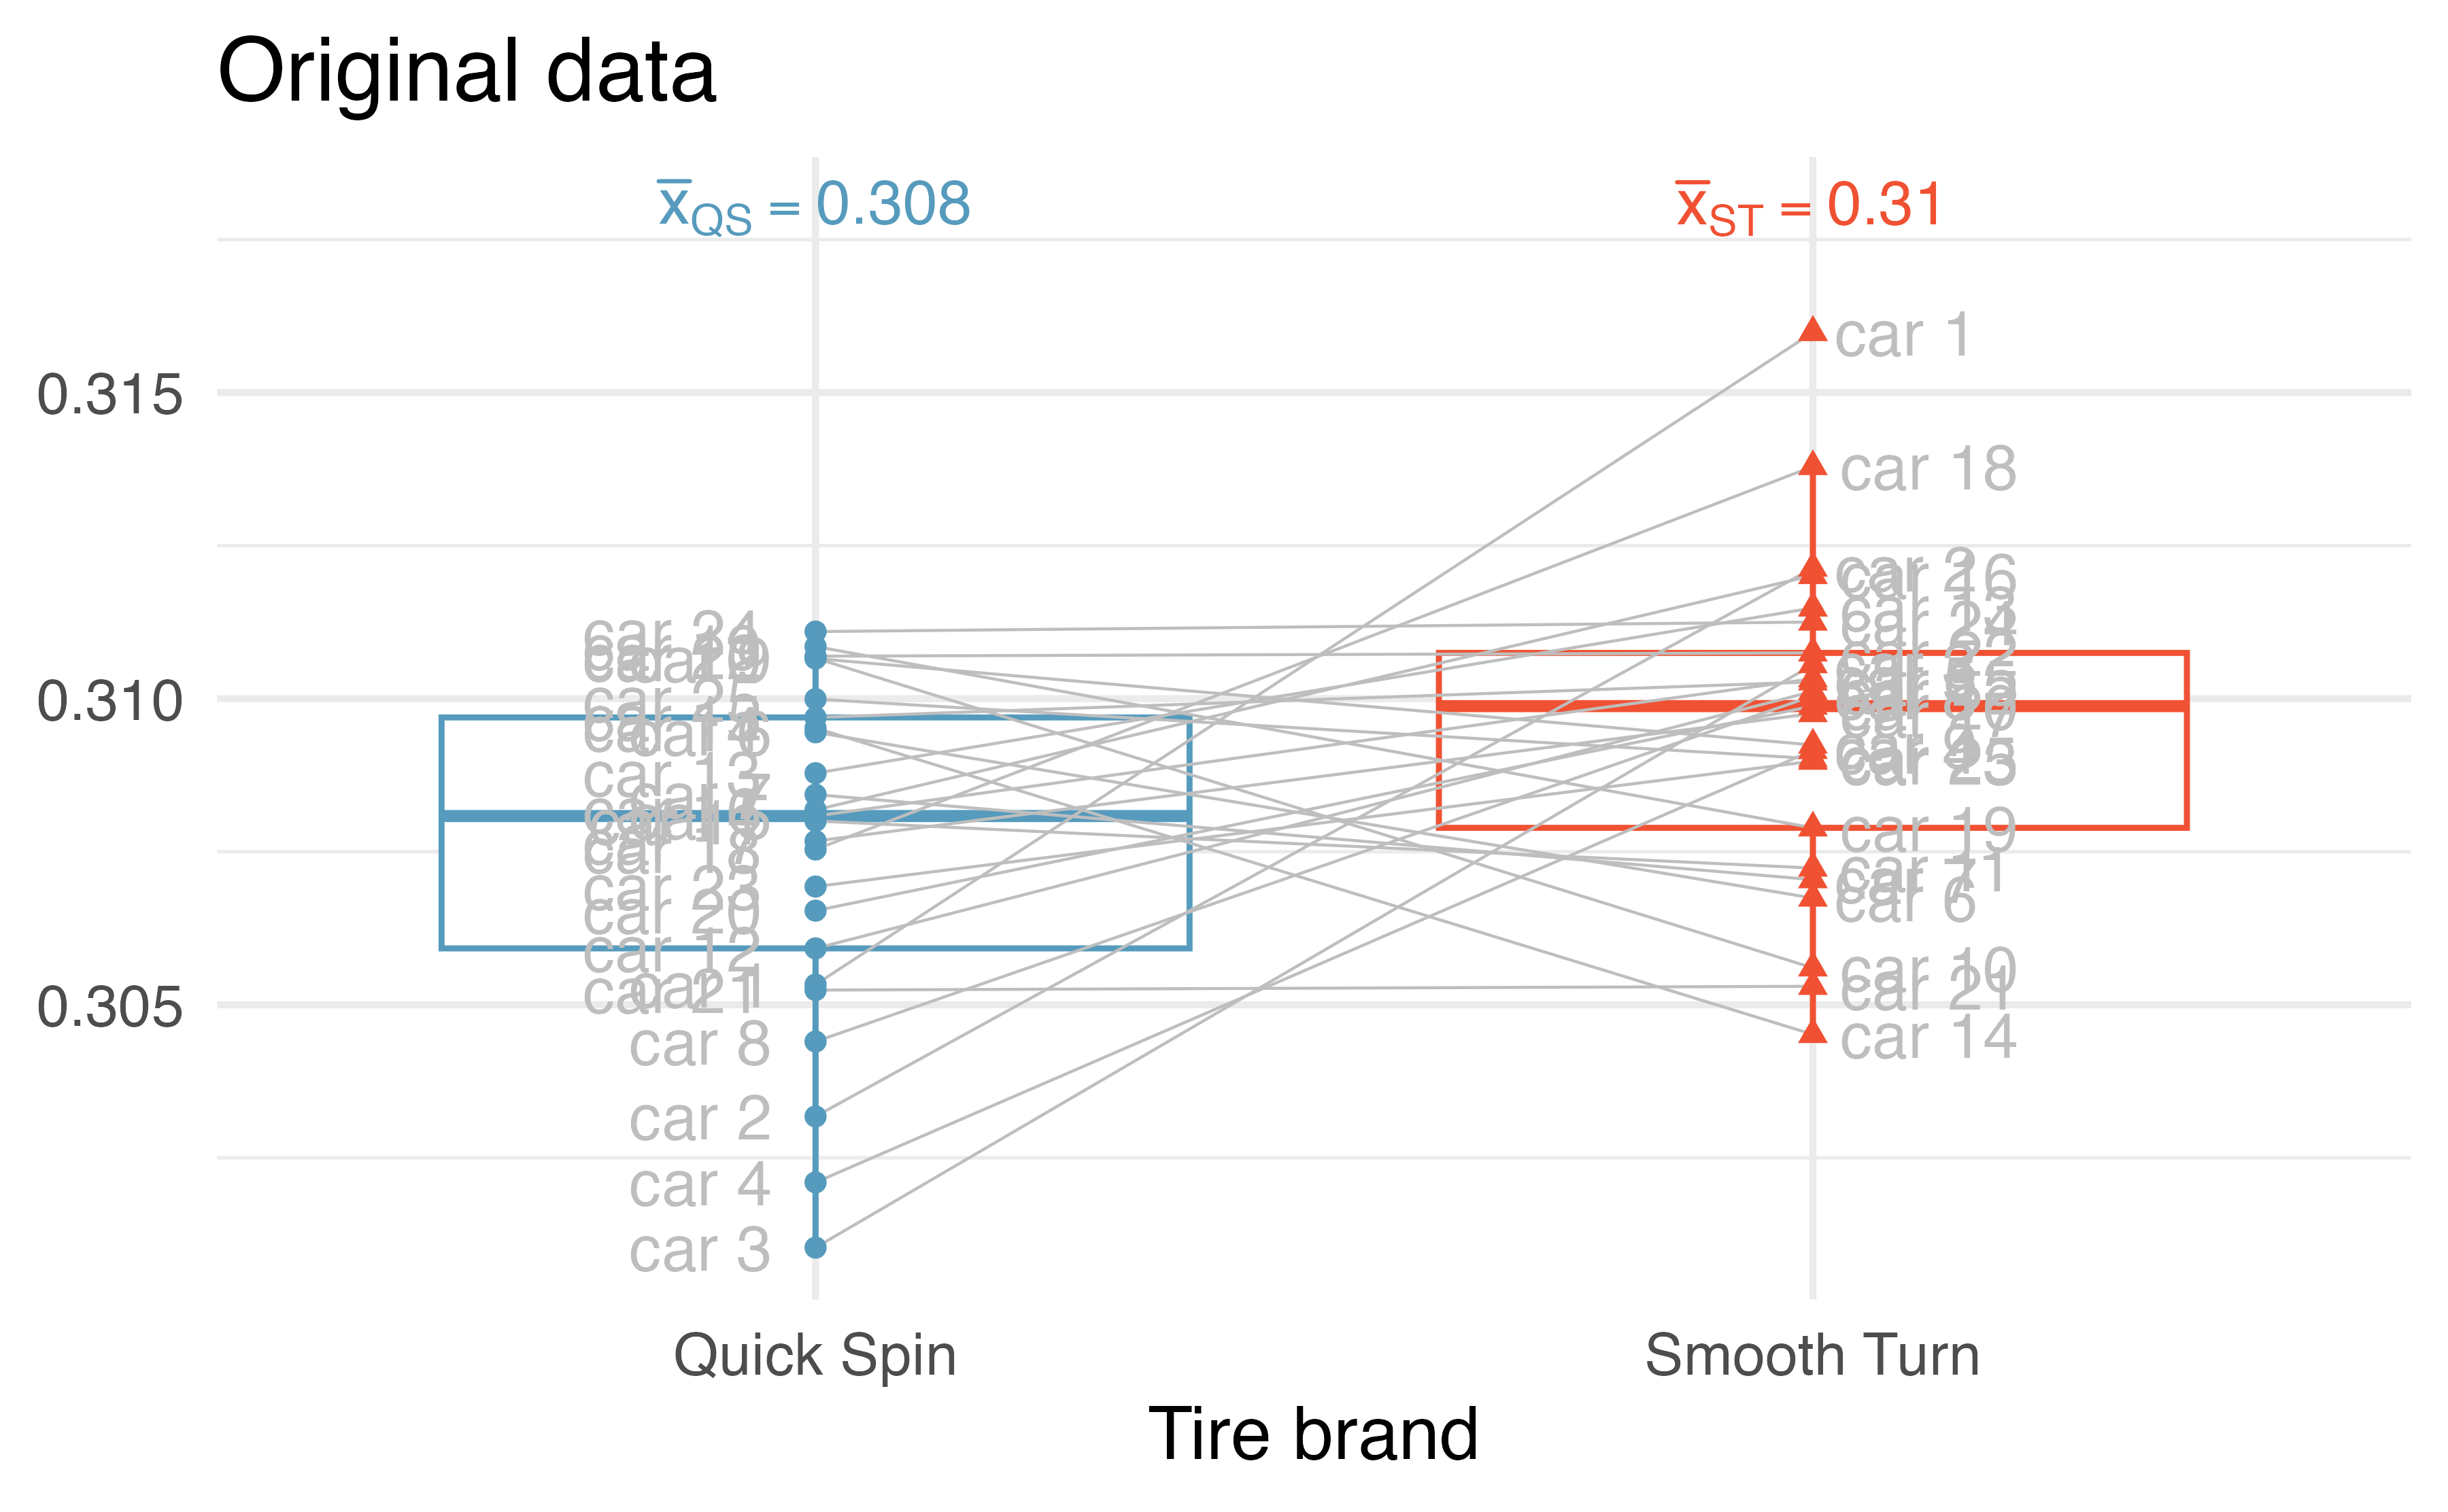 Boxplots of the amount of tire tread for each of the two brands of tires with data values superimposed over the boxplots. Each superimposed dot represents a car that drove with both types of tires. A grey line connects each car across the two boxplots indicating that Smooth Turn has more tire wear than Quick Spin.